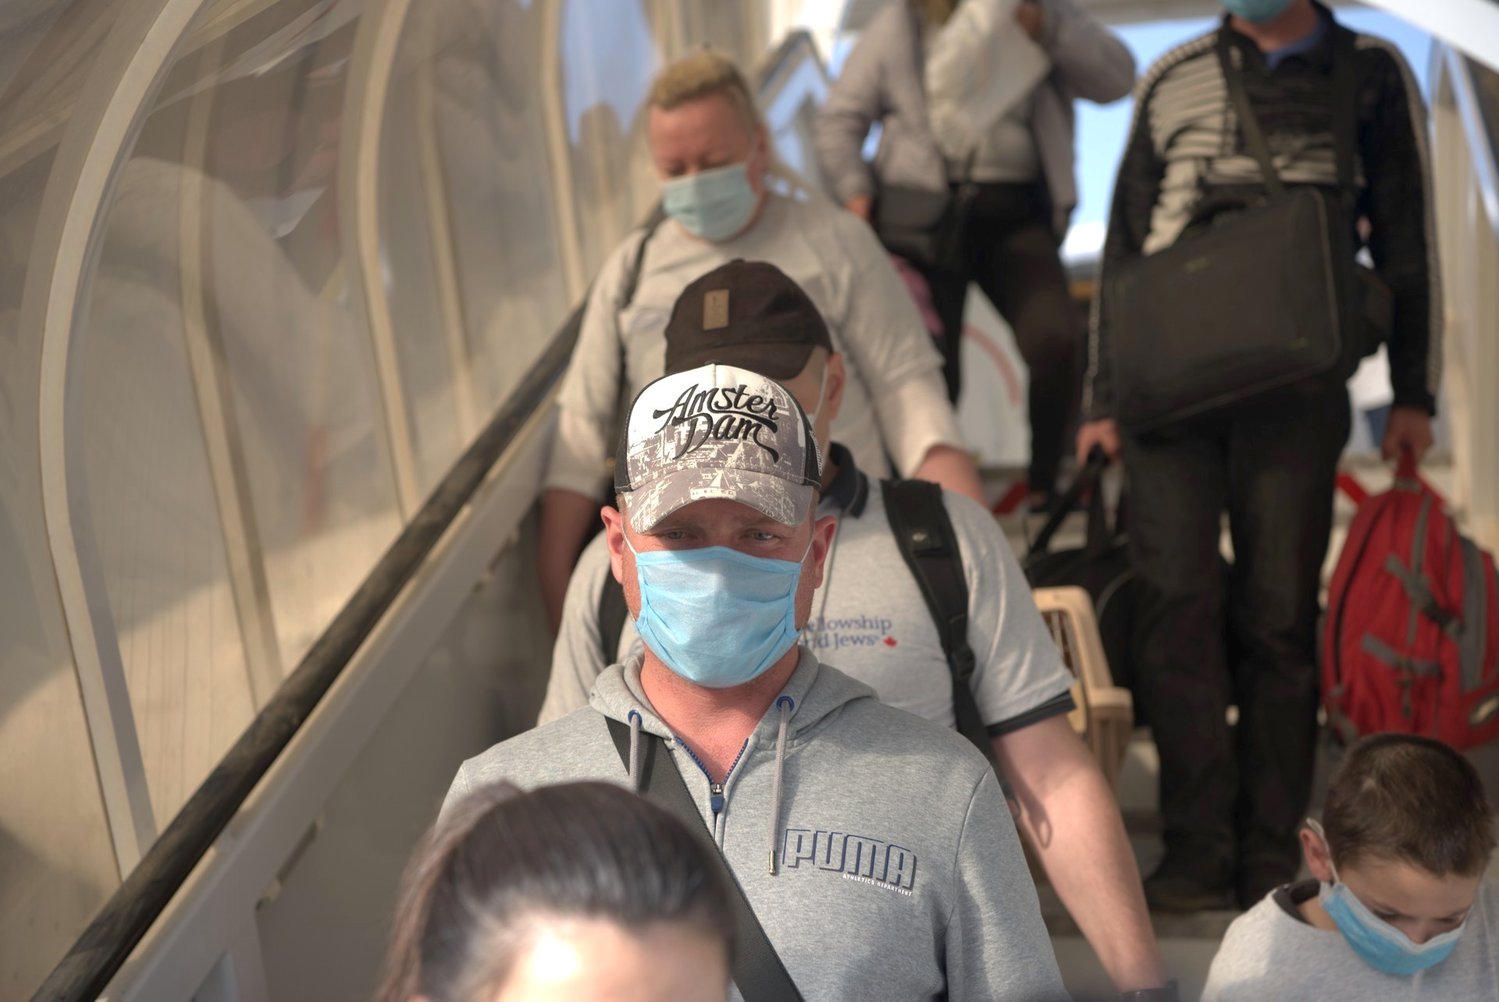 A group of new Jewish immigrants meant to arrive in Israel in March instead entered Ben-Gurion International Airport on May 20, 2020, due to delays as a result of the coronavirus.